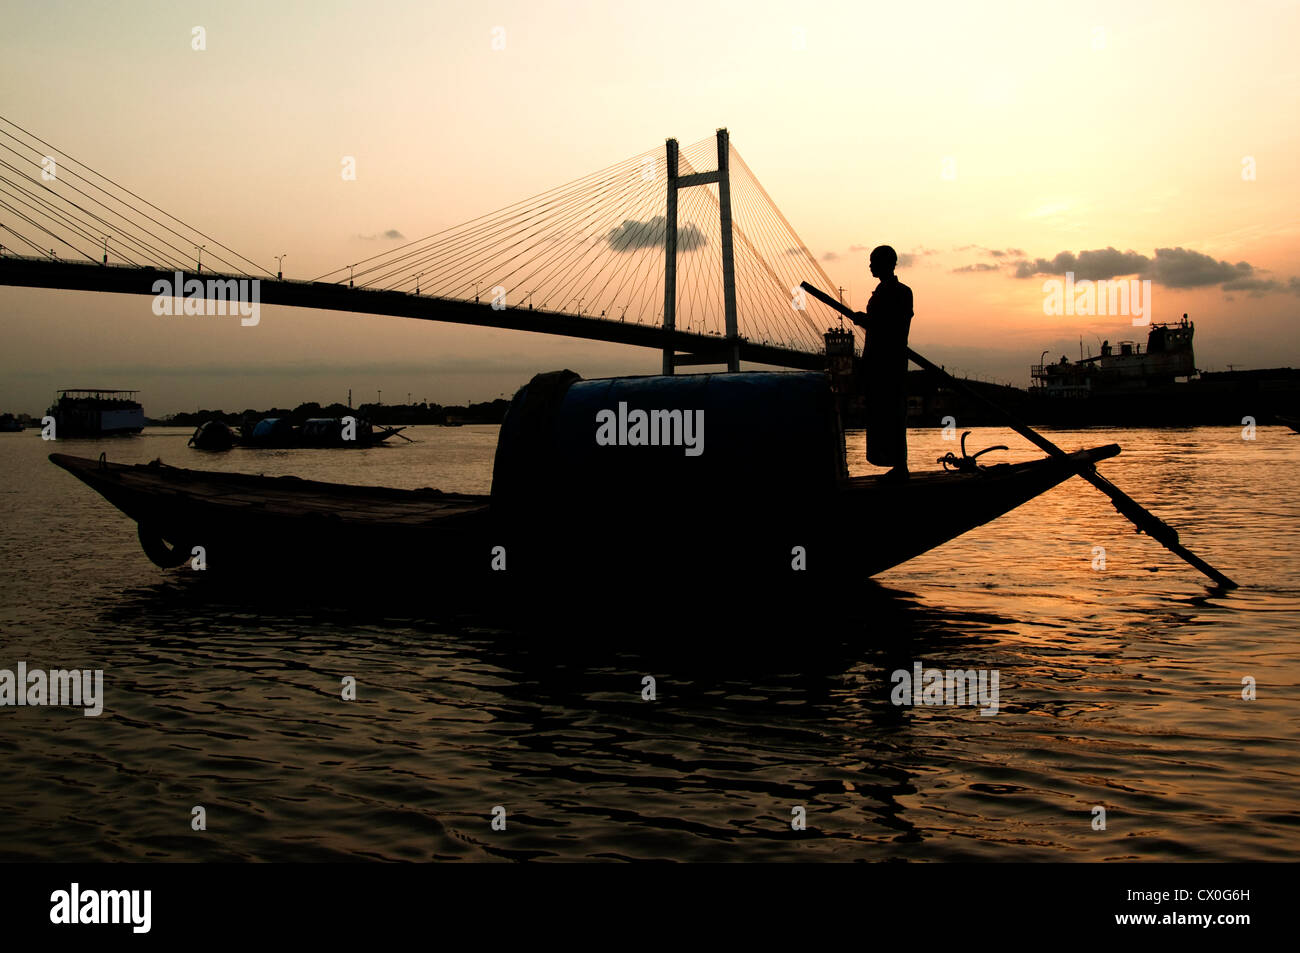 A boatman standing on his boat at the evening over the river Ganges at Kolkata, Indai. Stock Photo